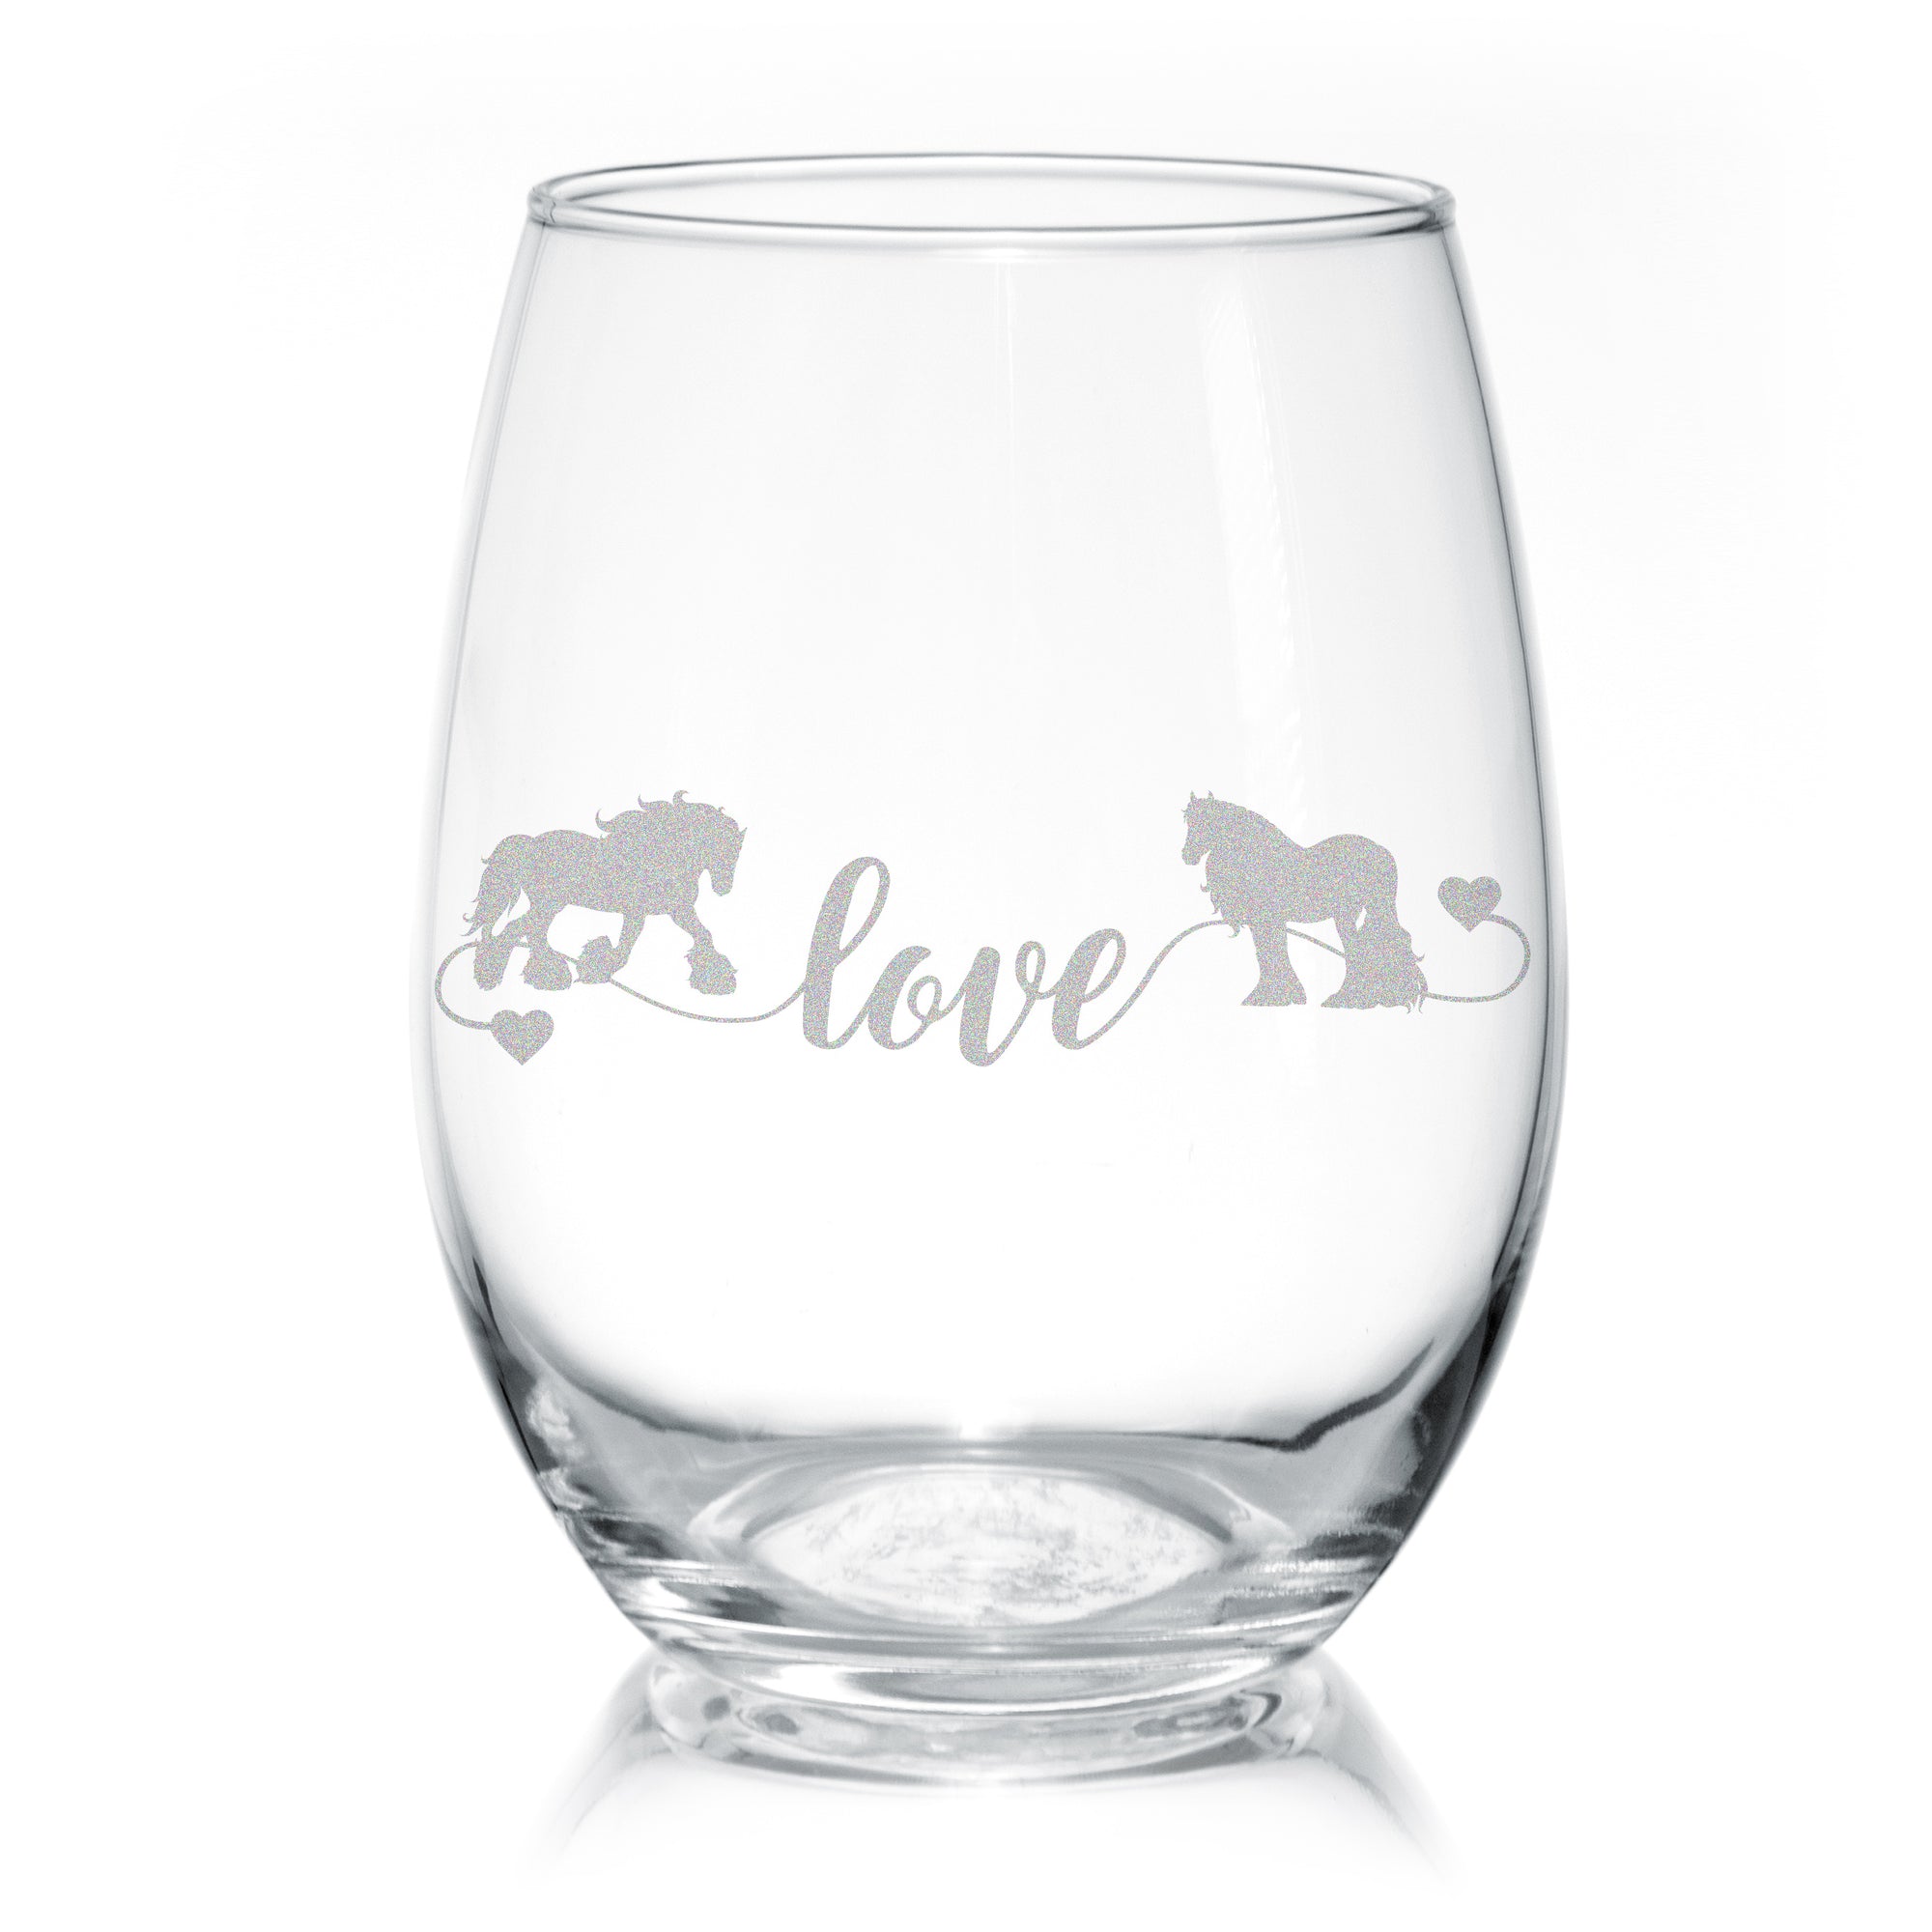 Vinglace Rose Gold Stemless Wine Glass – Hanley-Wood Texas